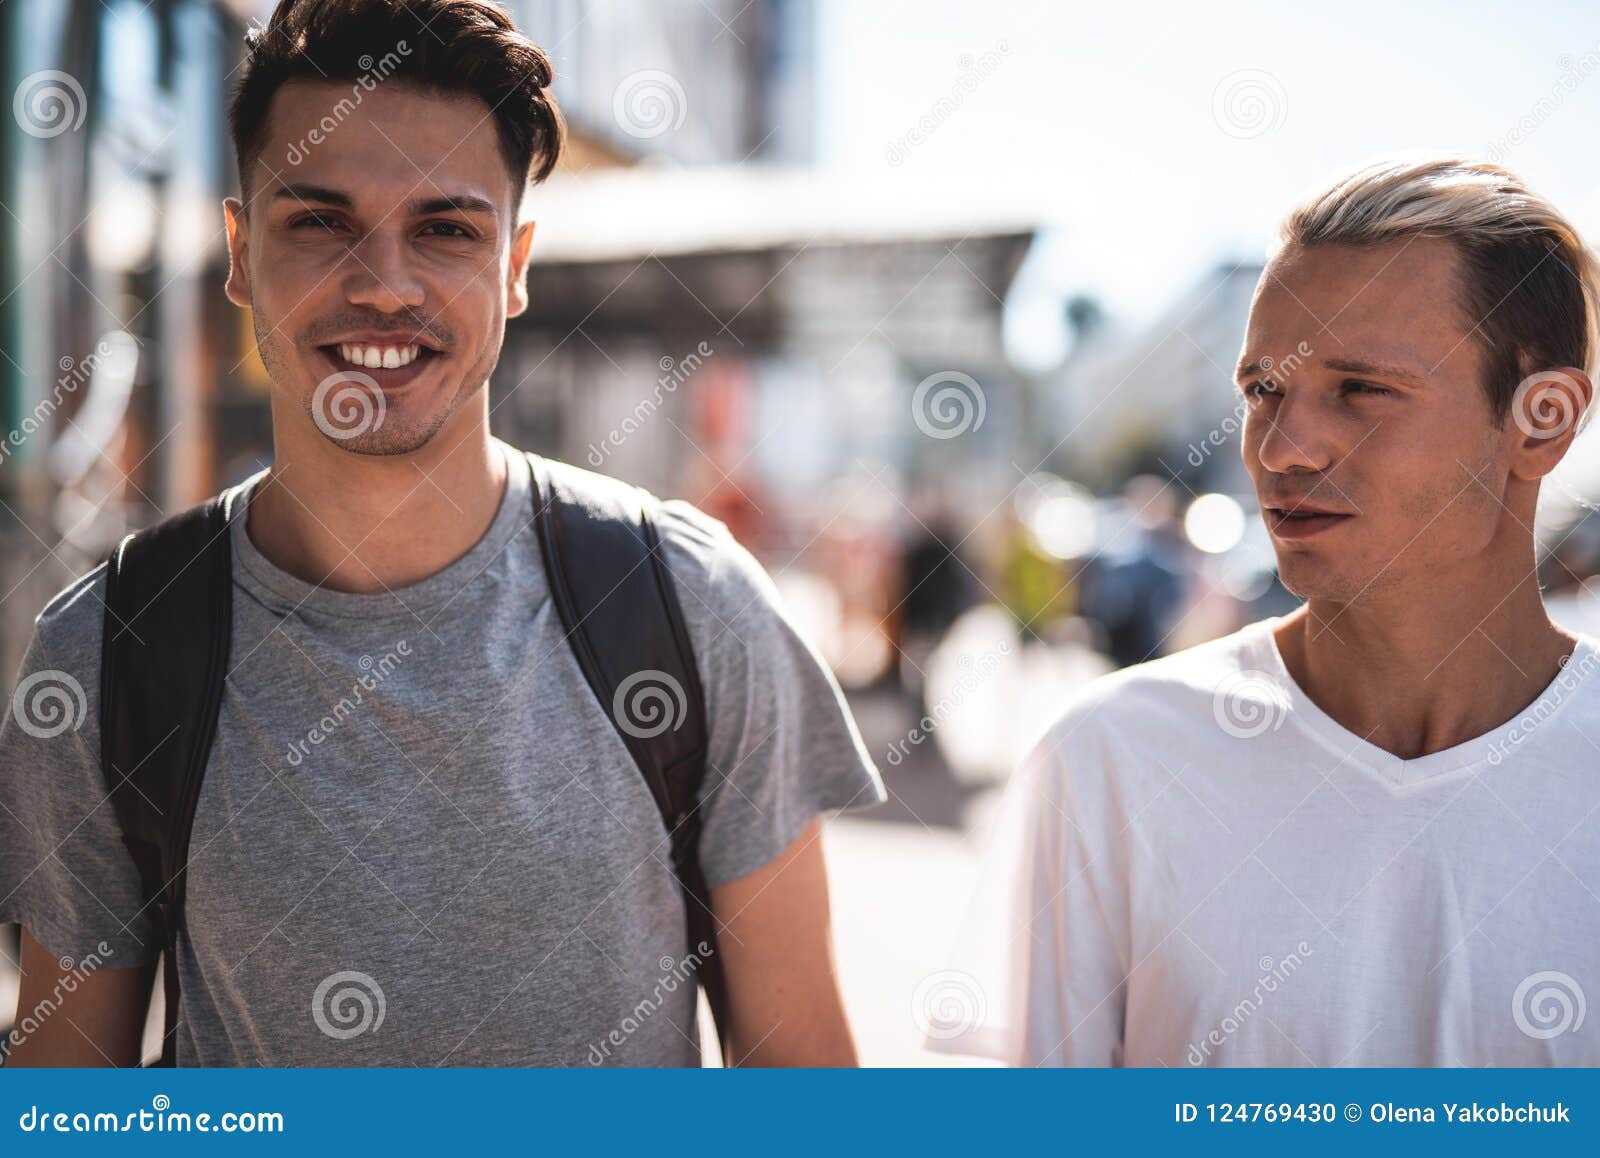 Optimistic Friends Speaking during Sunny Walk Outdoor Stock Photo ...